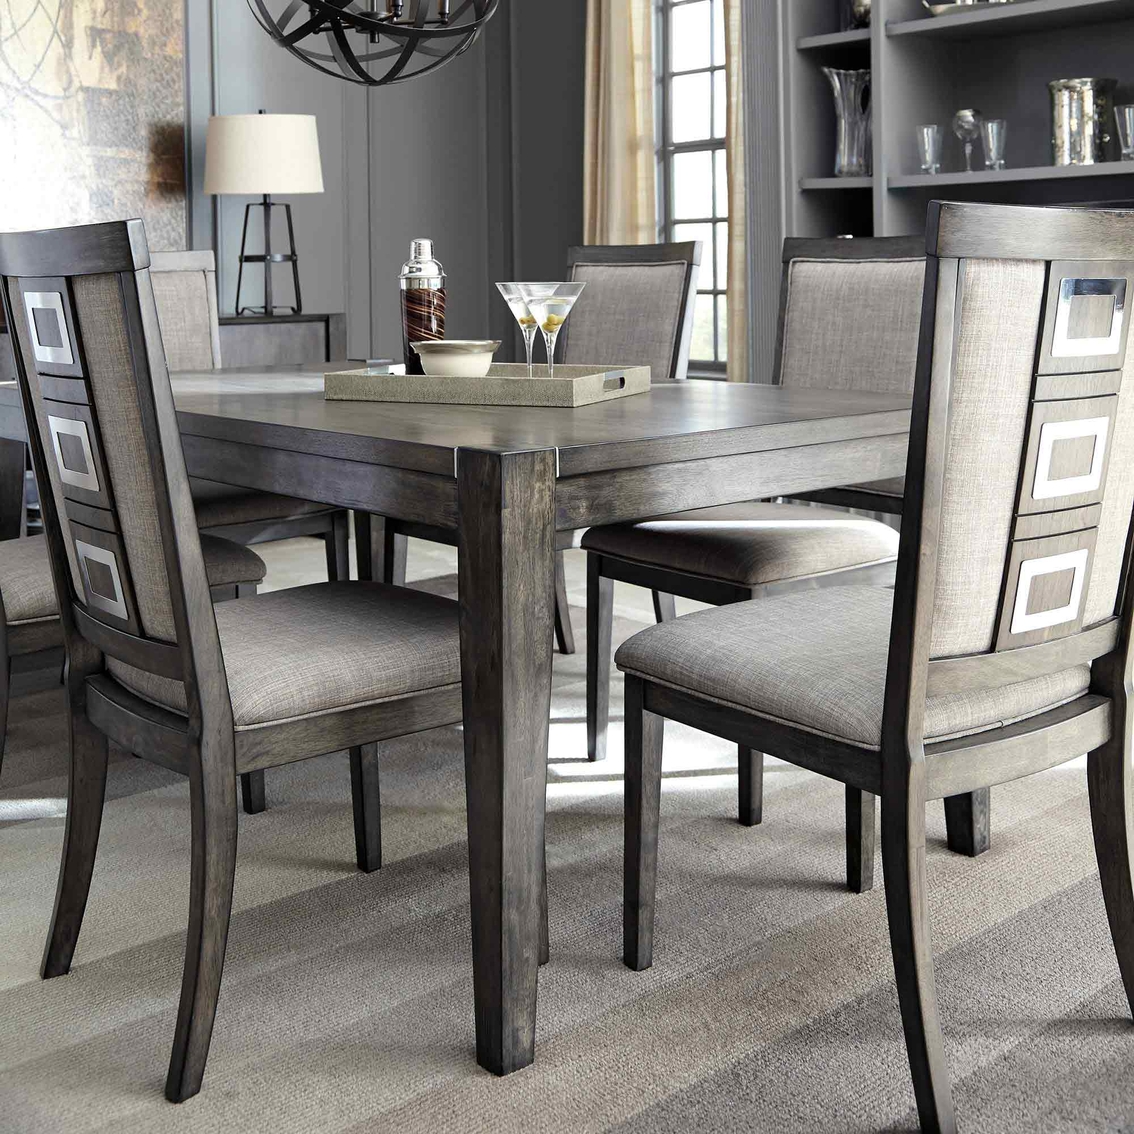 Signature Design by Ashley Chadoni Rectangular Dining Extension Table - Image 3 of 4